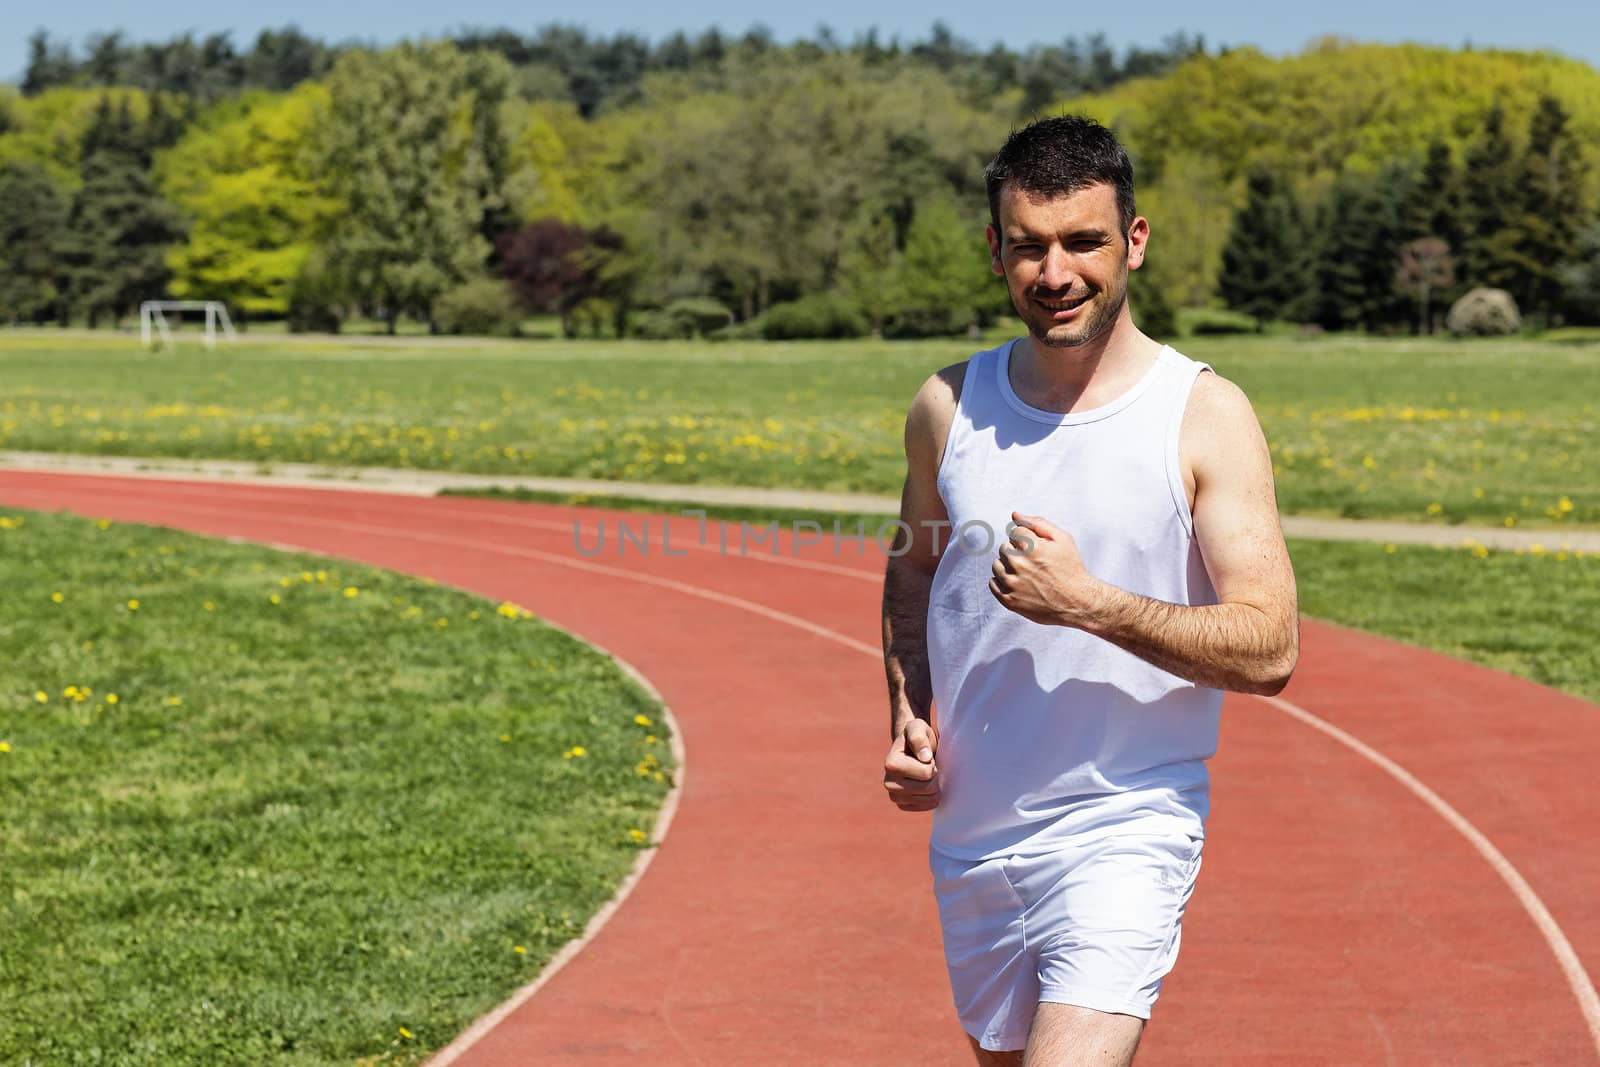 man running on a track in spring